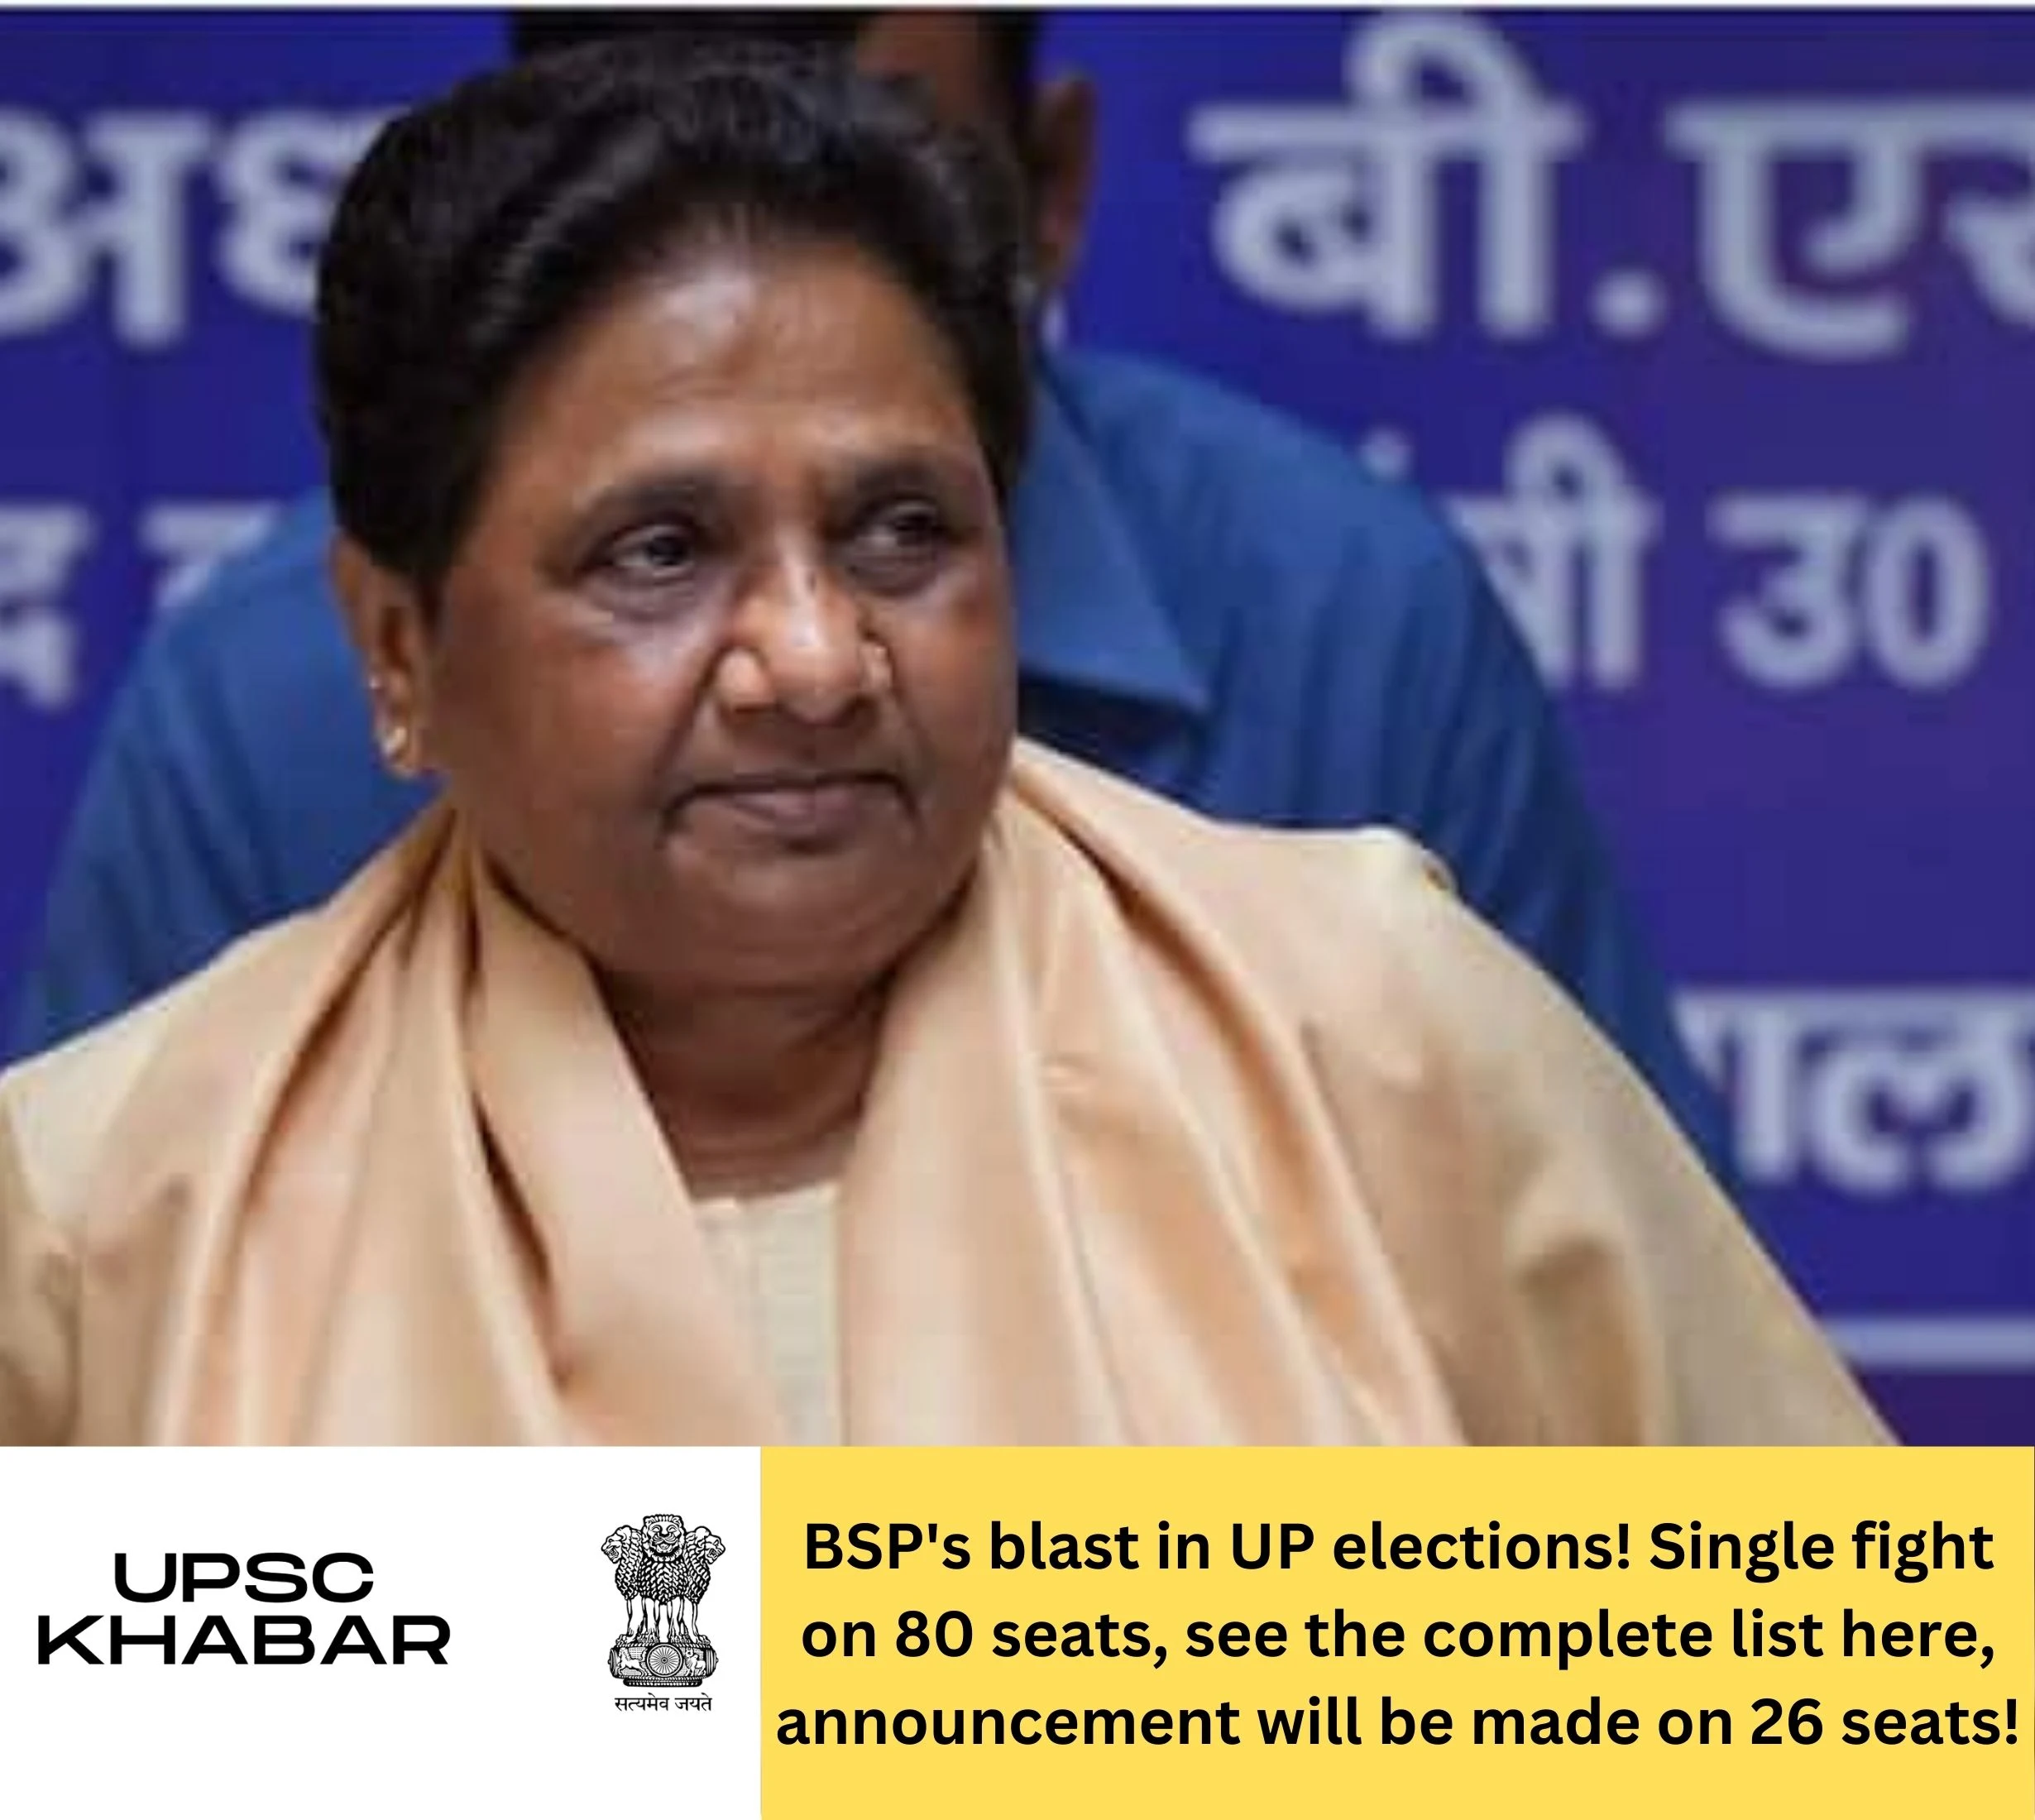 BSP's blast in UP elections! Single fight on 80 seats, see the complete list here, announcement will be made on 26 seats!